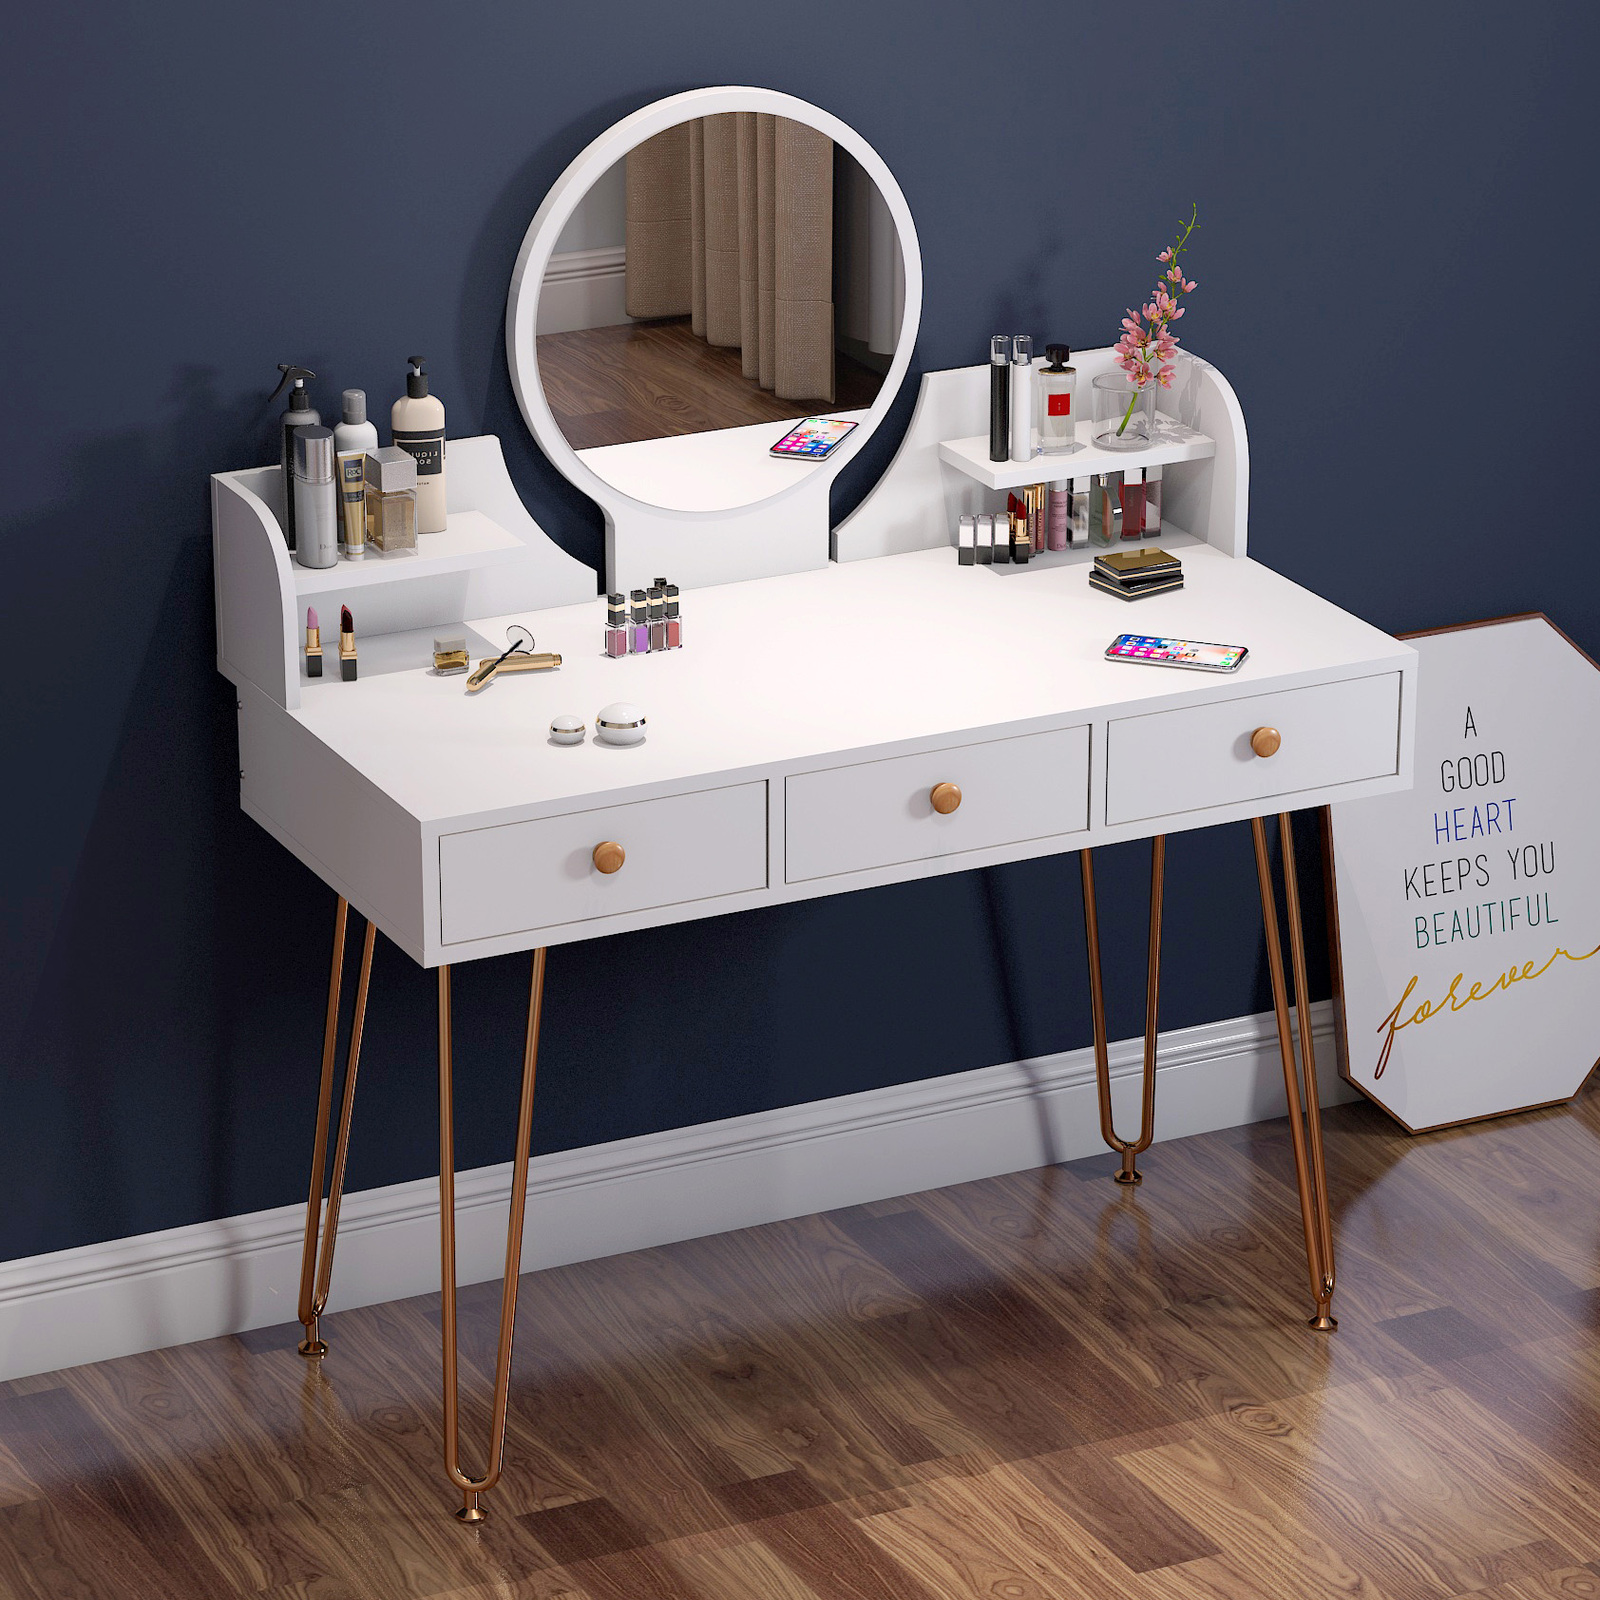 Dess Large Dresser Vanity Table With, Vanity Table No Mirror